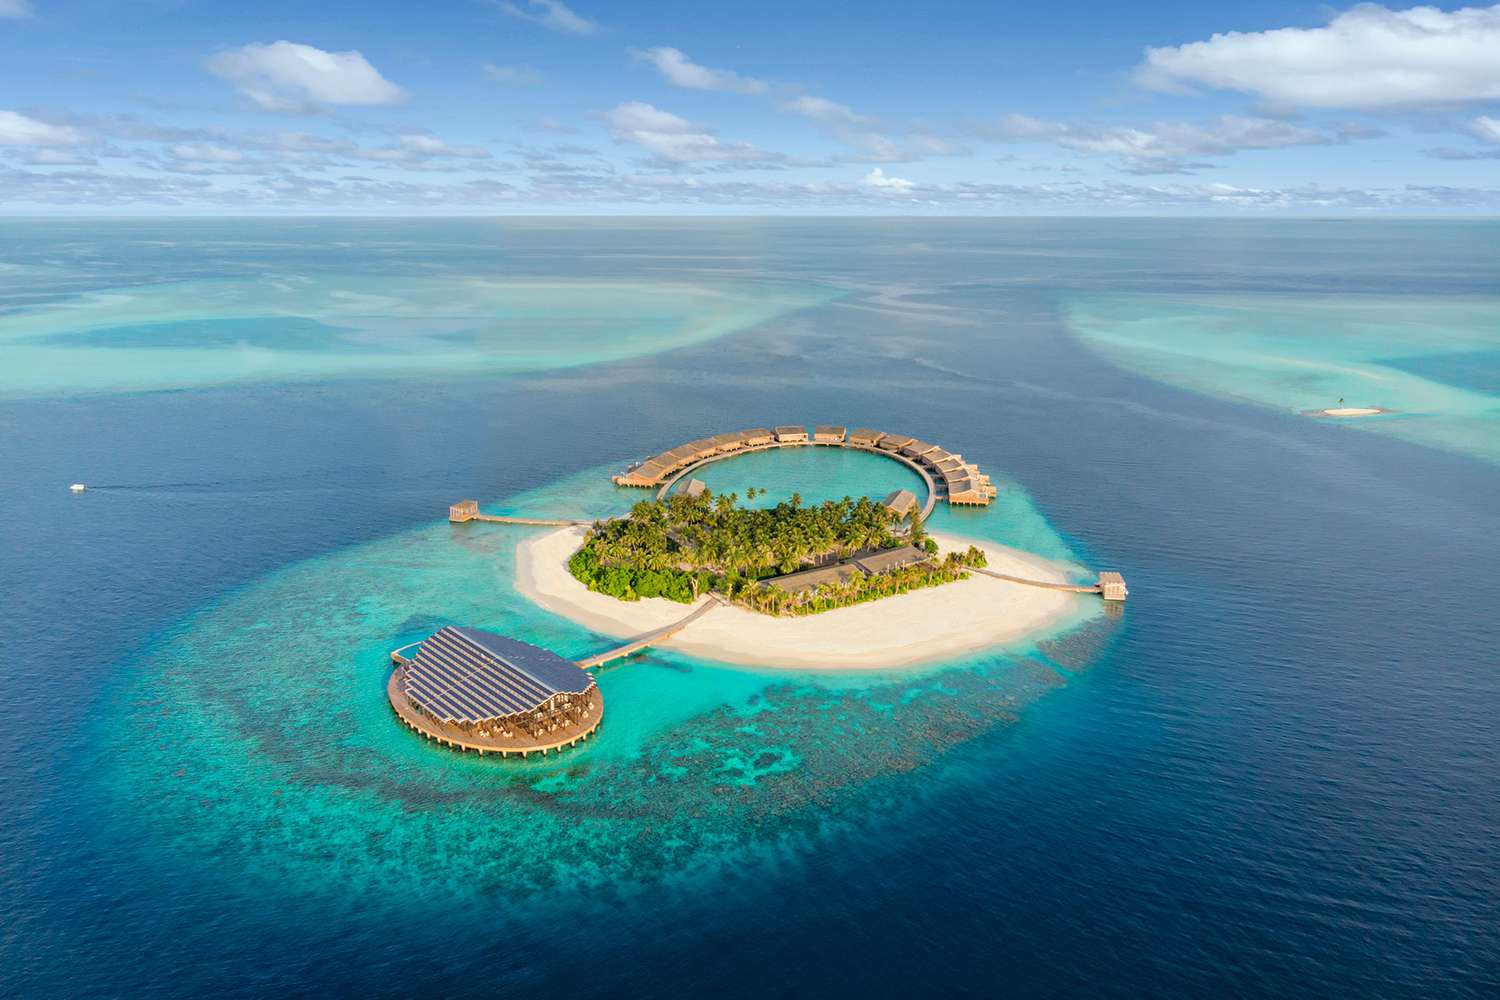 Maldives – A Paradise in the Indian Ocean